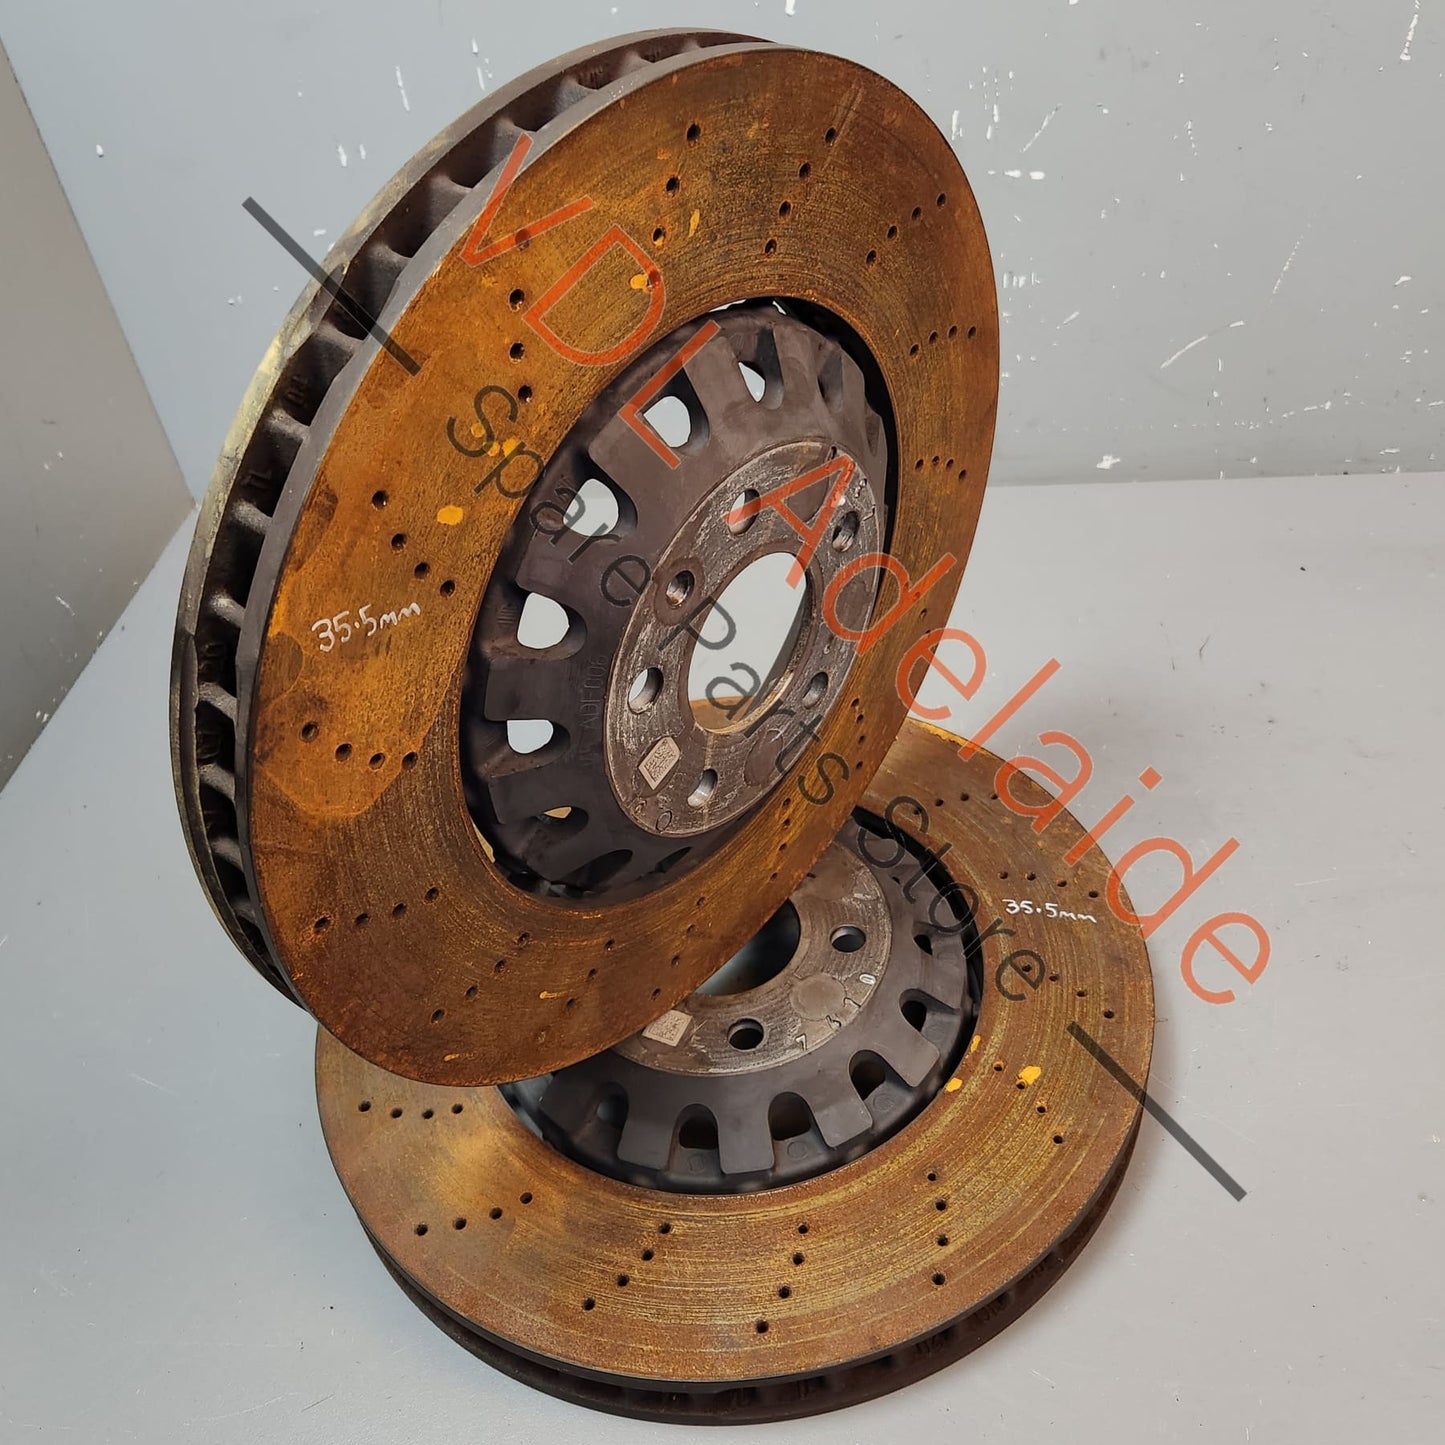 4M0615301AM Audi RS5 F5 B9 Front Brake Disc Rotor Pair 4M0615301AM 375 x 36mm 75% Life Left